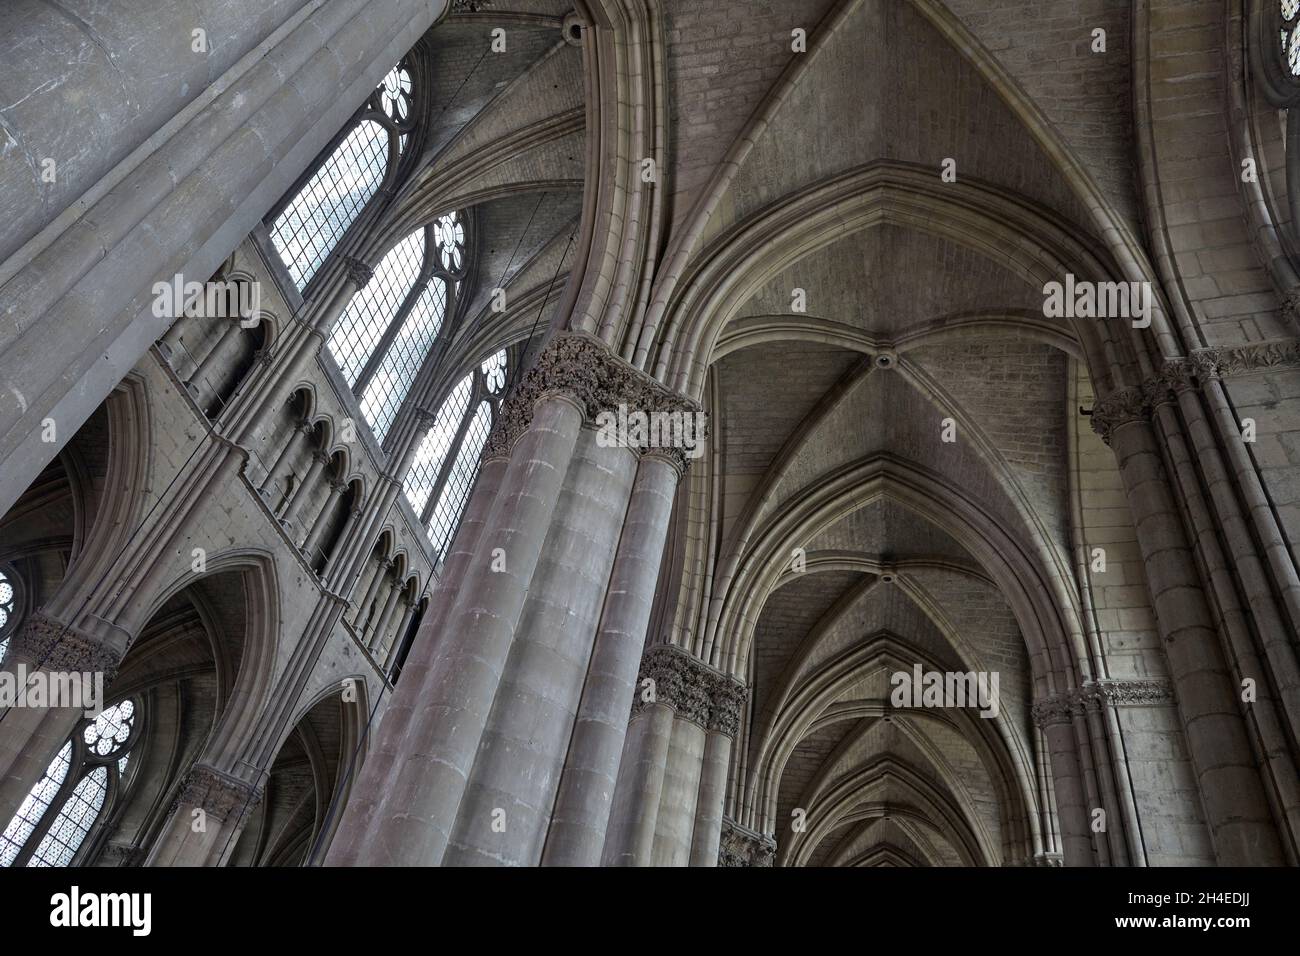 Cathedral of Reims. Vaults of right and central naves. Reims. France. Stock Photo